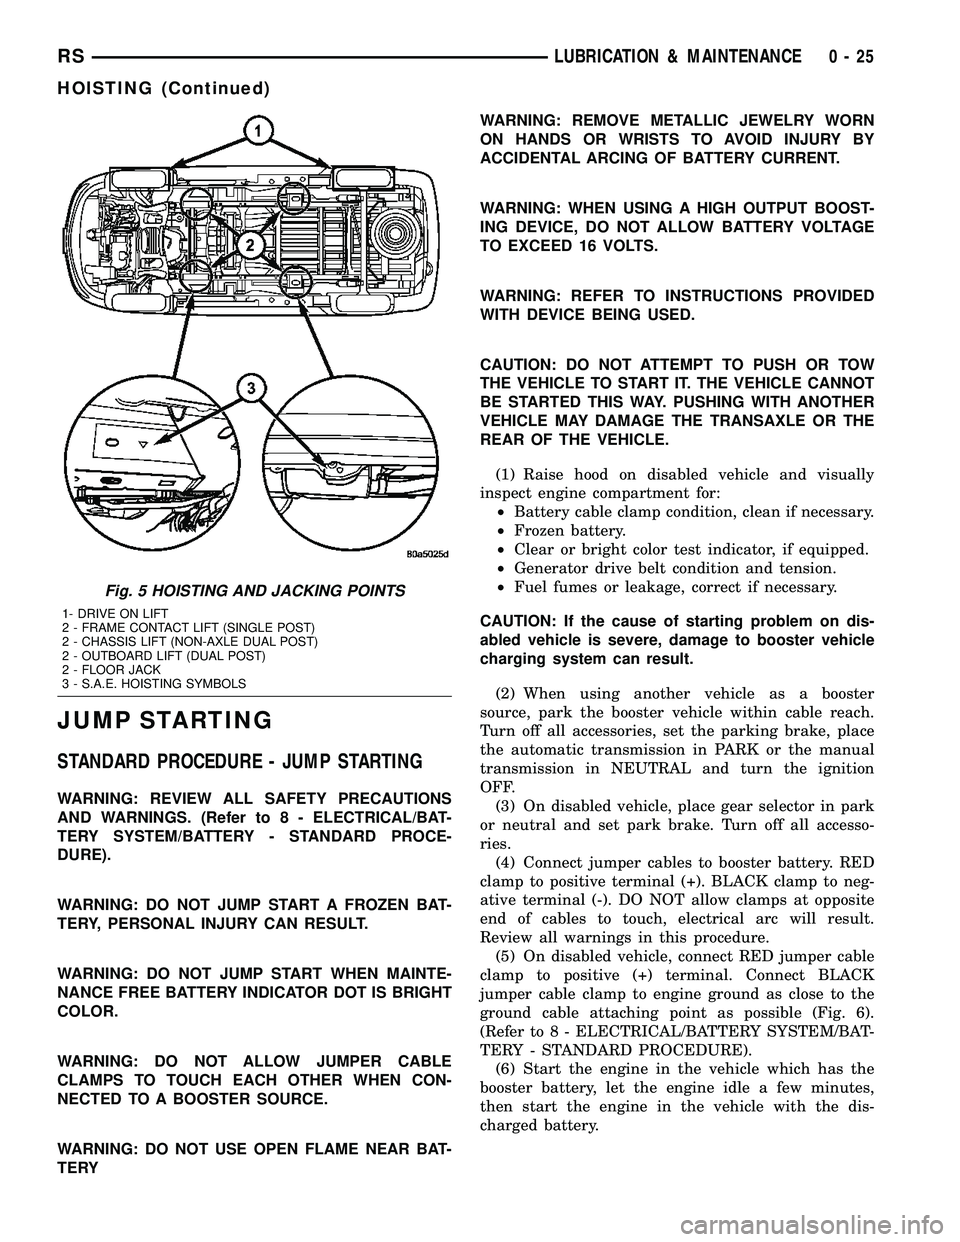 CHRYSLER VOYAGER 2005 User Guide JUMP STARTING
STANDARD PROCEDURE - JUMP STARTING
WARNING: REVIEW ALL SAFETY PRECAUTIONS
AND WARNINGS. (Refer to 8 - ELECTRICAL/BAT-
TERY SYSTEM/BATTERY - STANDARD PROCE-
DURE).
WARNING: DO NOT JUMP ST